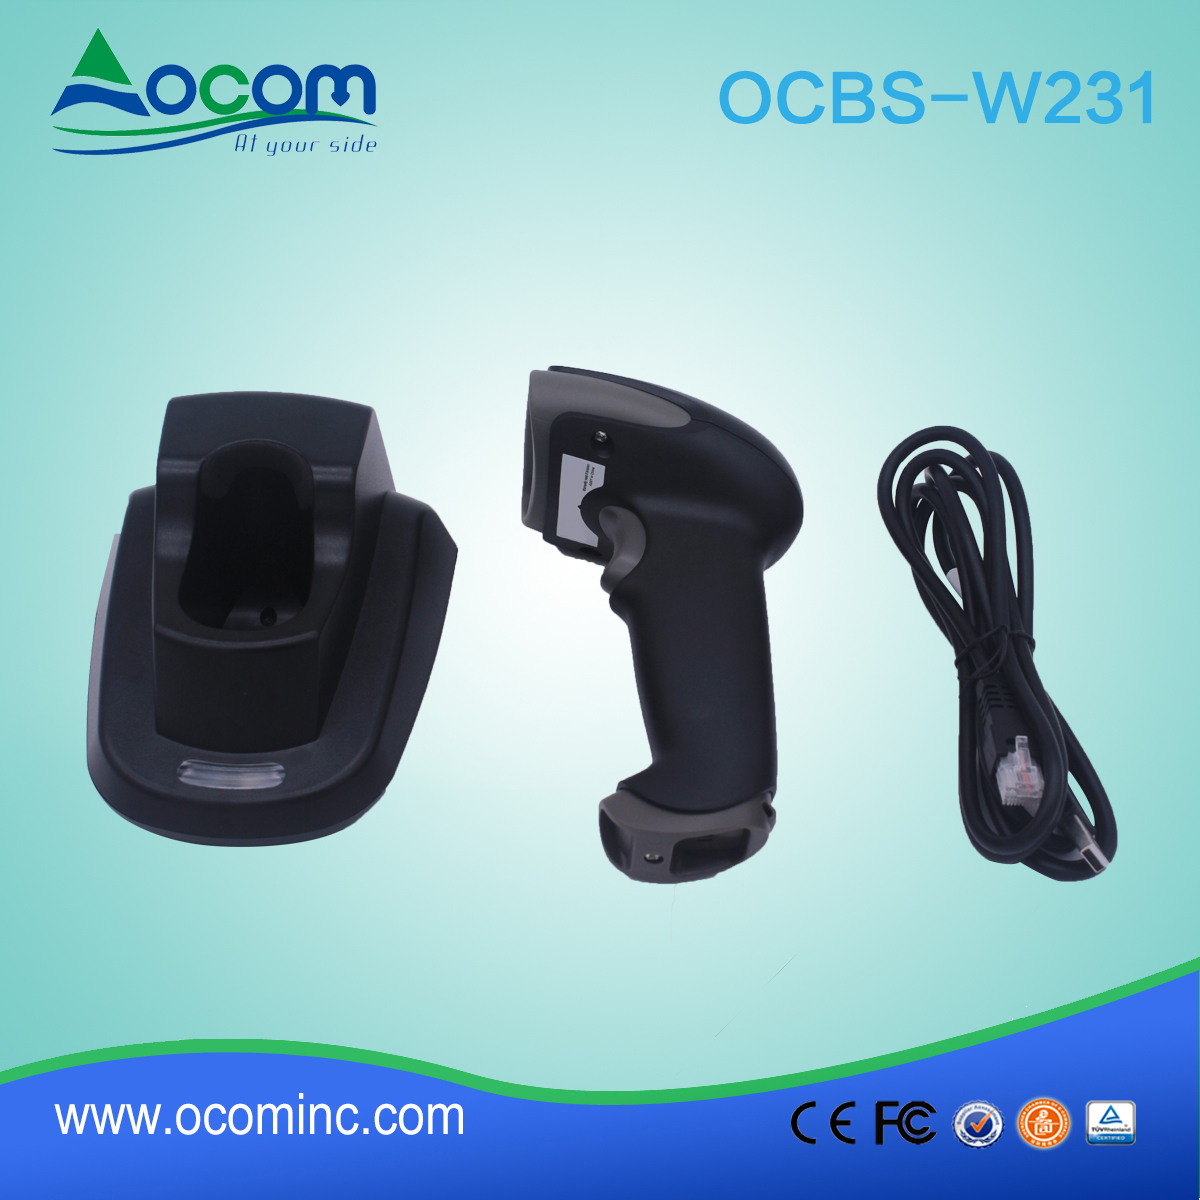 (OCBS-W231) High quality wireless 2D barcode scanner with cradle